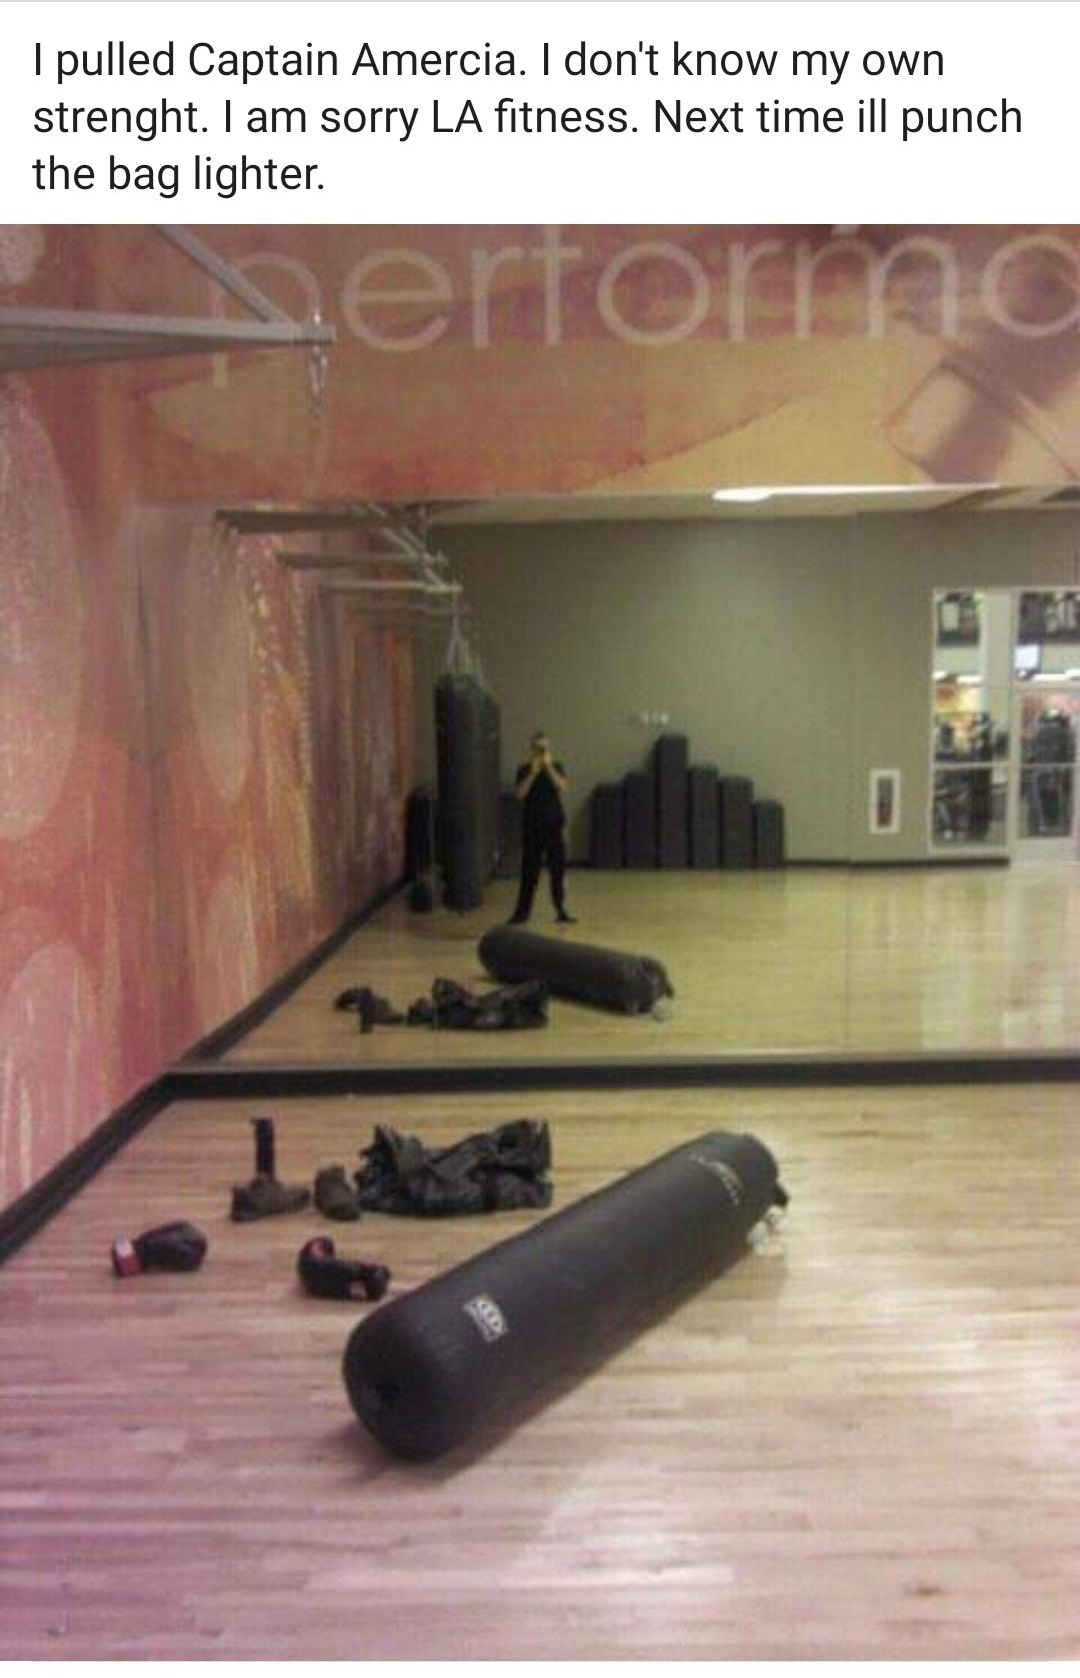 floor - I pulled Captain Amercia. I don't know my own strenght. I am sorry La fitness. Next time ill punch the bag lighter.